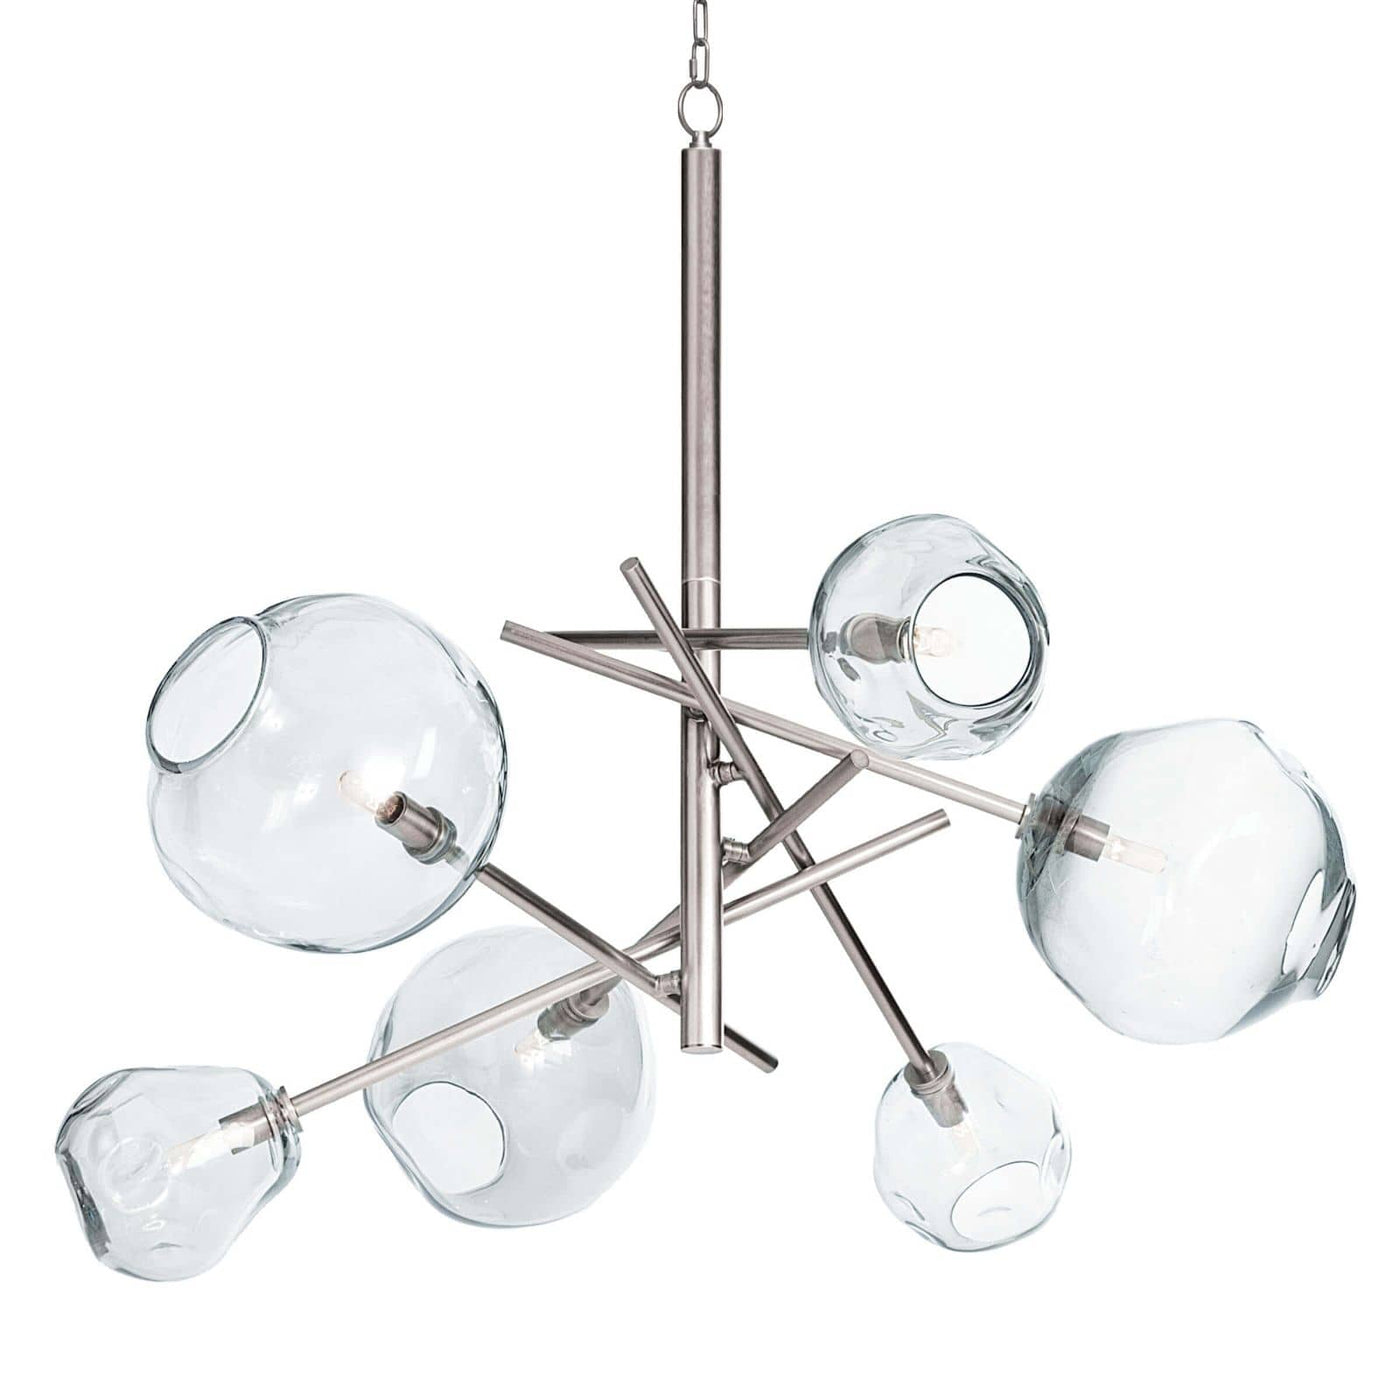 MOLTEN CHANDELIER WITH CLEAR GLASS & POLISHED NICKEL